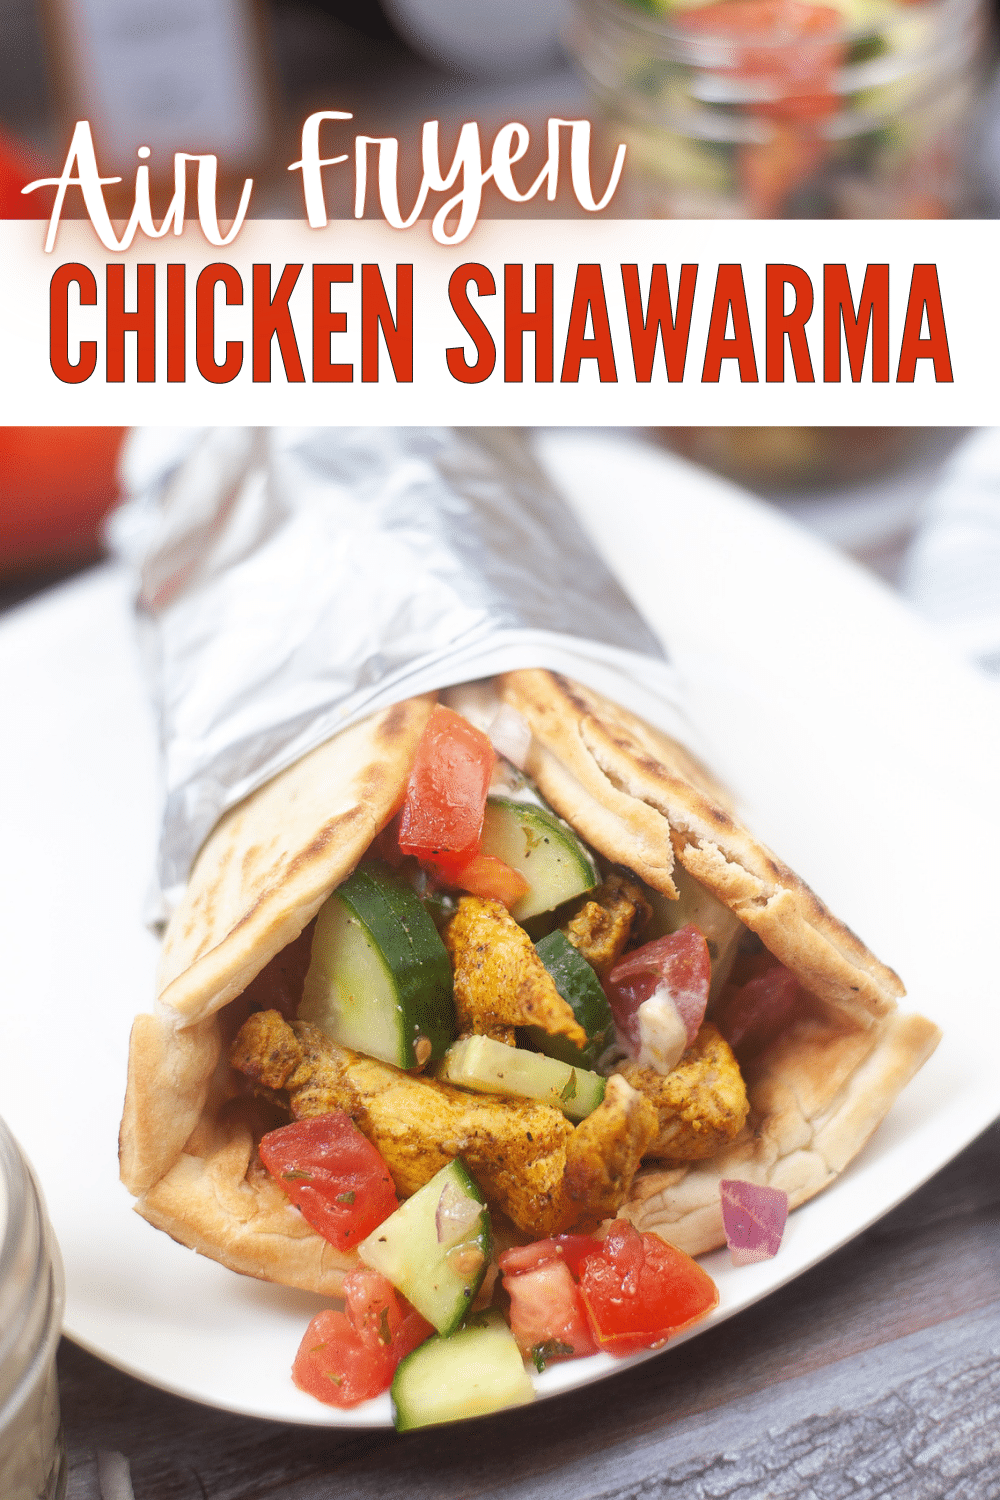 This Air Fryer Chicken Shawarma is a delicious twist on the traditional Middle Eastern dish. It's an easy meal your family will enjoy. #airfryerchickenshawarma #airfryer #chickenshawarma #chicken #dinnerrecipe via @wondermomwannab